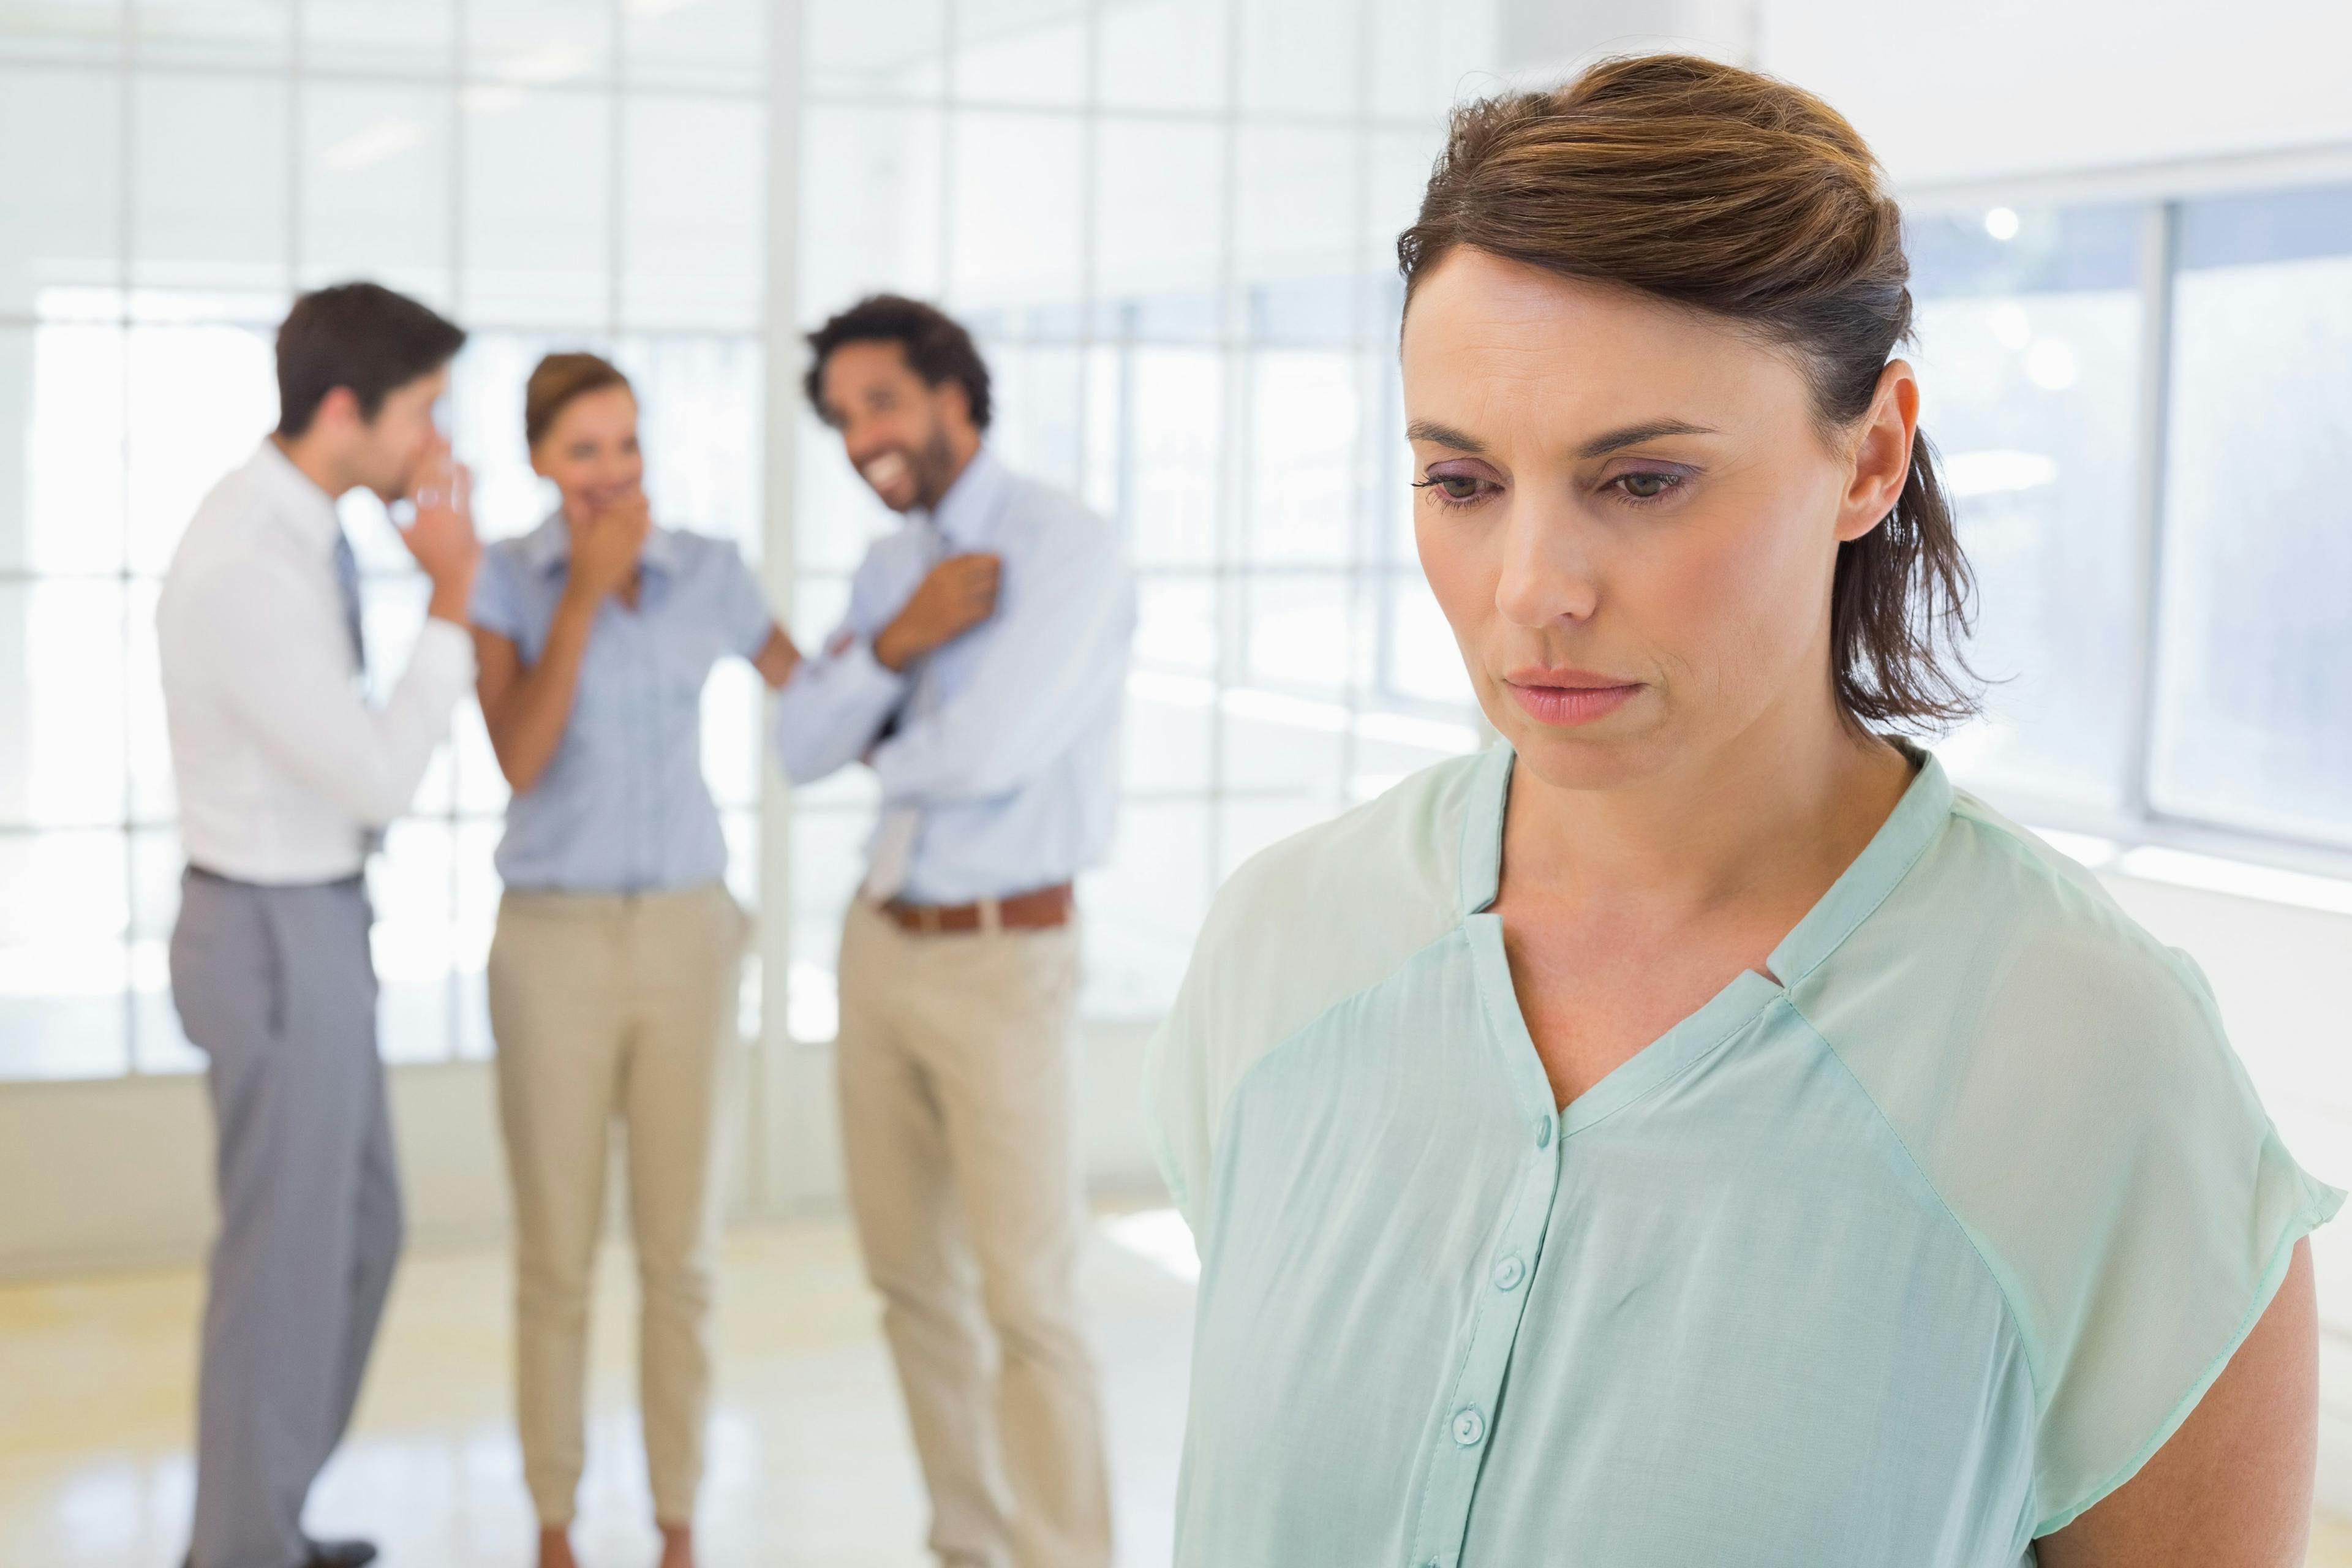 Putting a stop to workplace bullying 